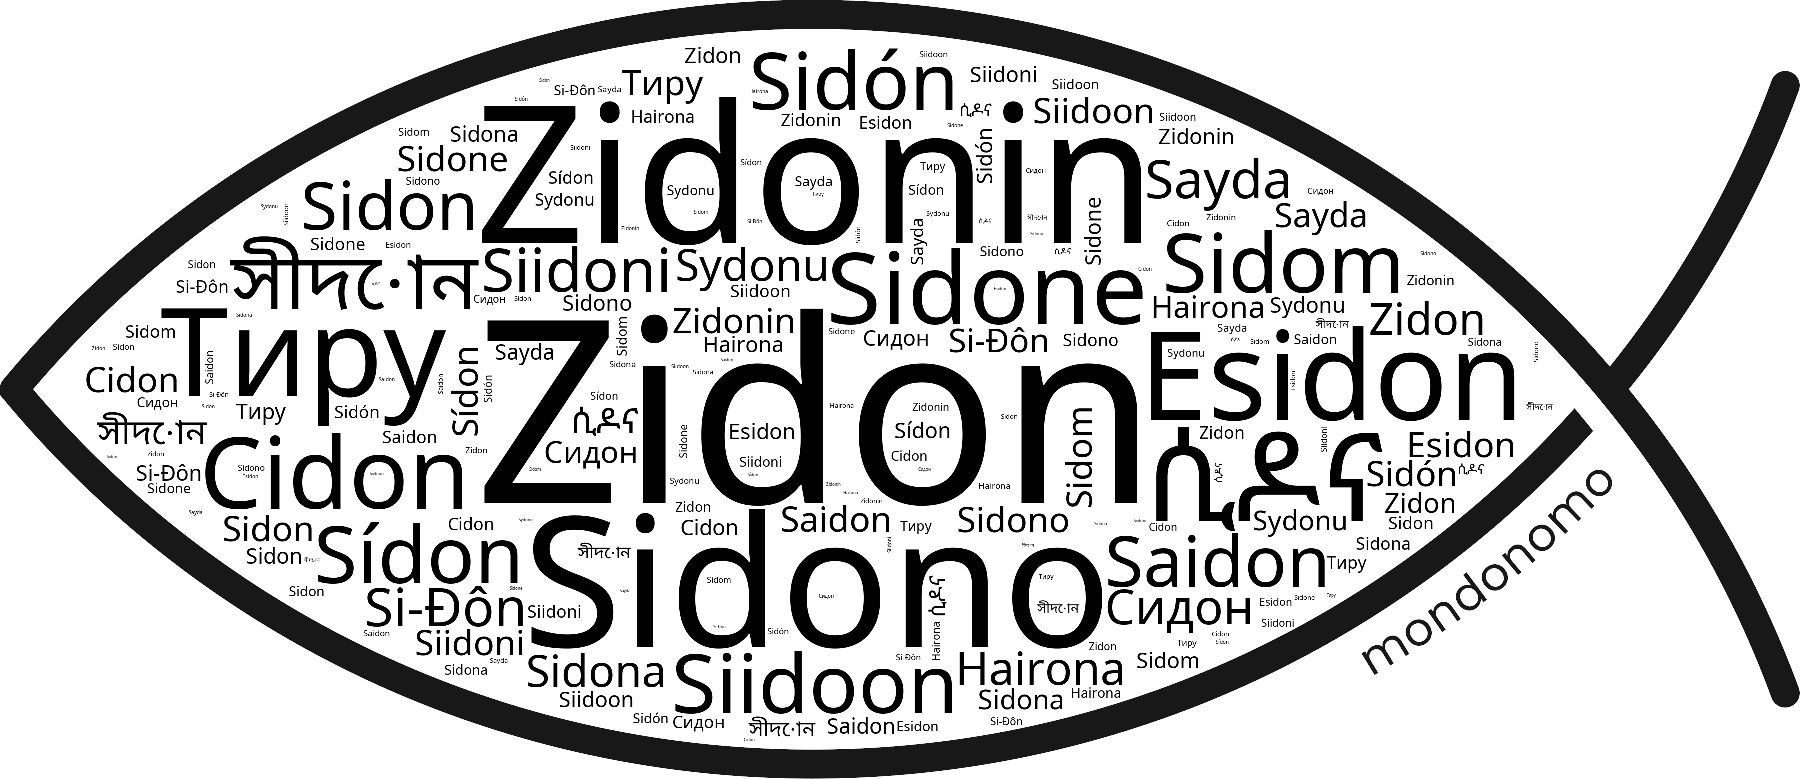 Name Zidon in the world's Bibles